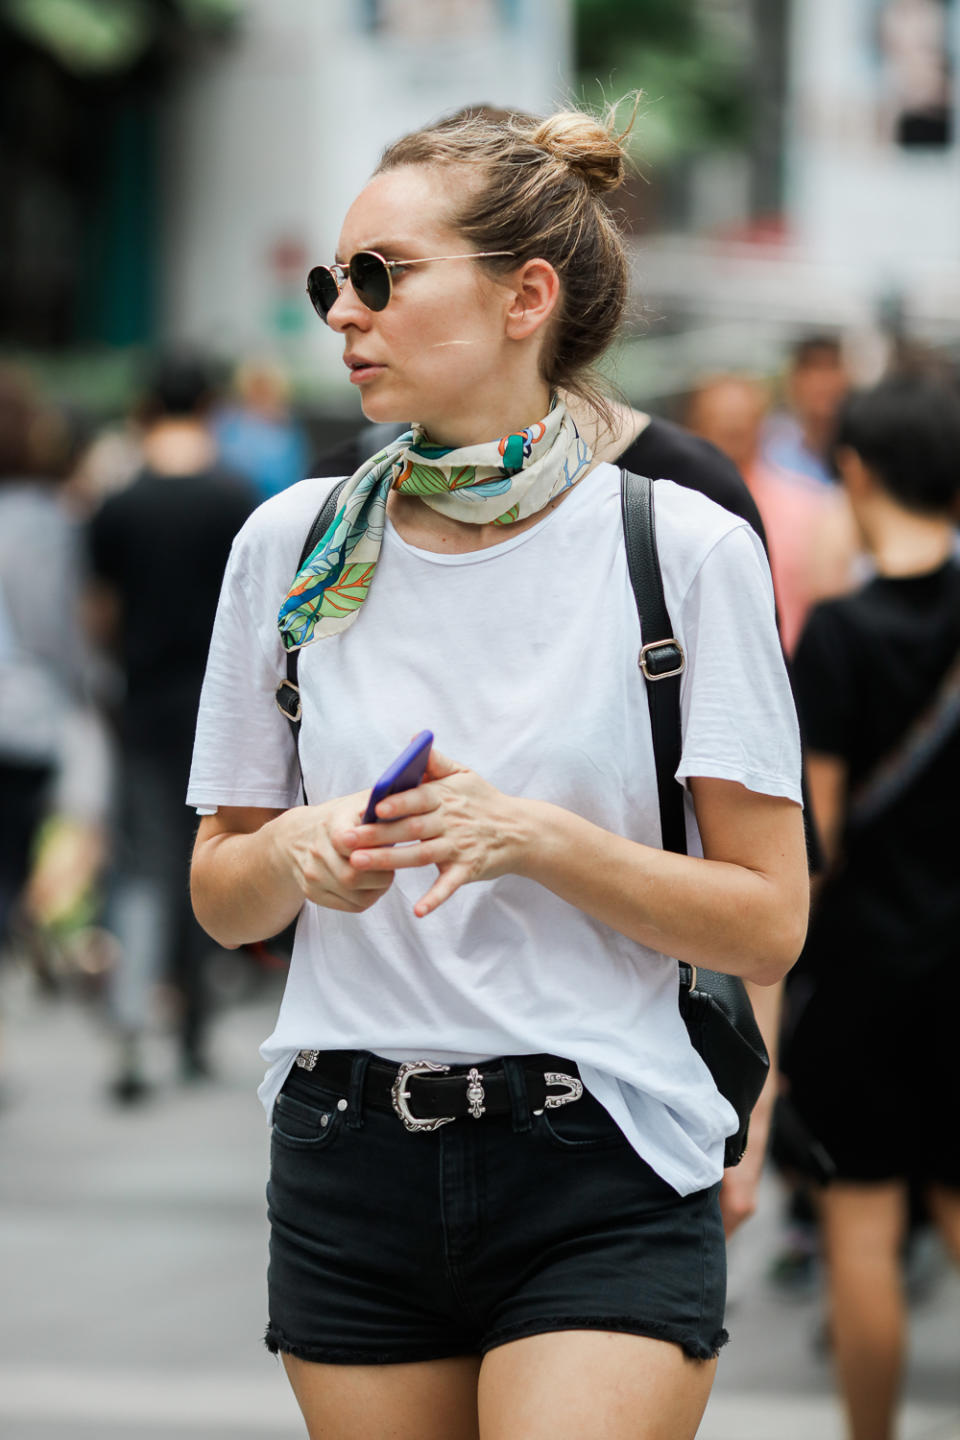 Street style inspiration from the streets of Singapore (12)